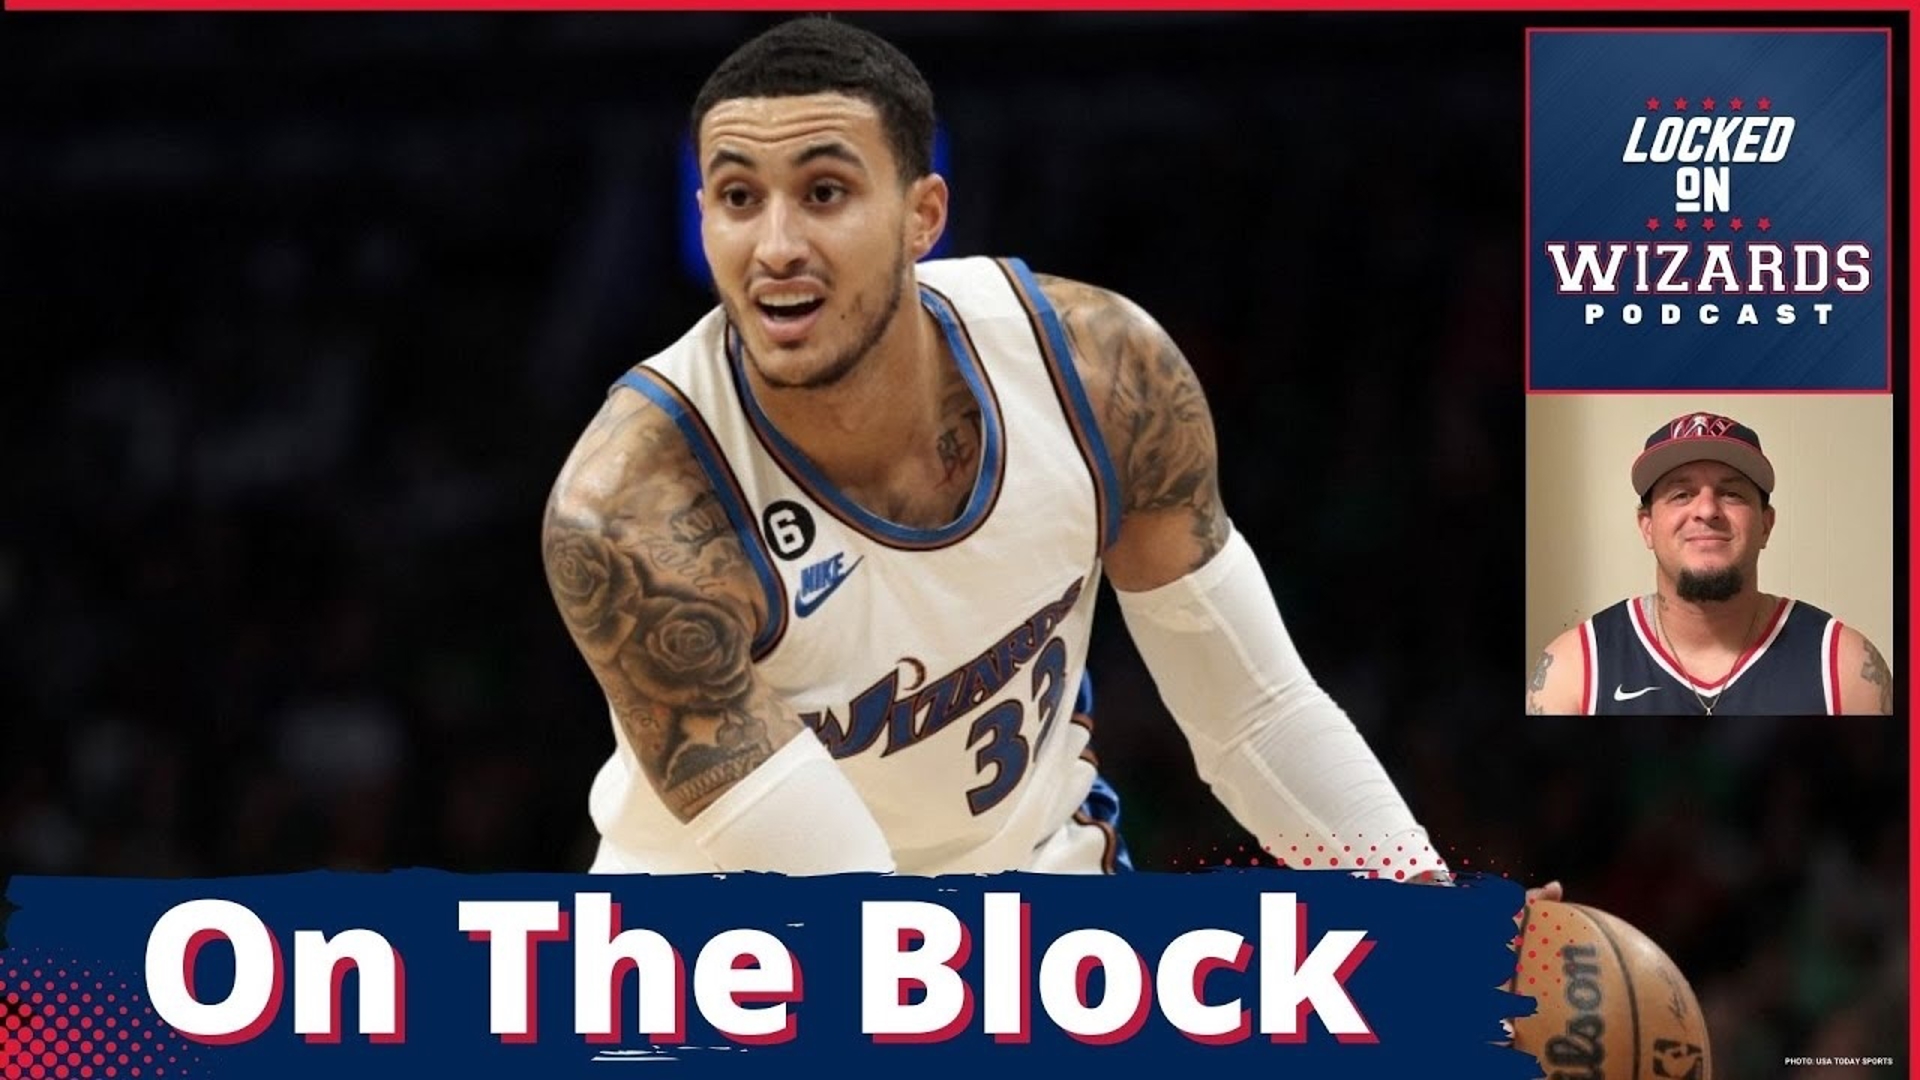 Brandon makes his case on whether the Wizards should or should not trade Kyle Kuzma. He also reacts to a Fox 5 story on Capital being among the unsafest NBA Arenas.